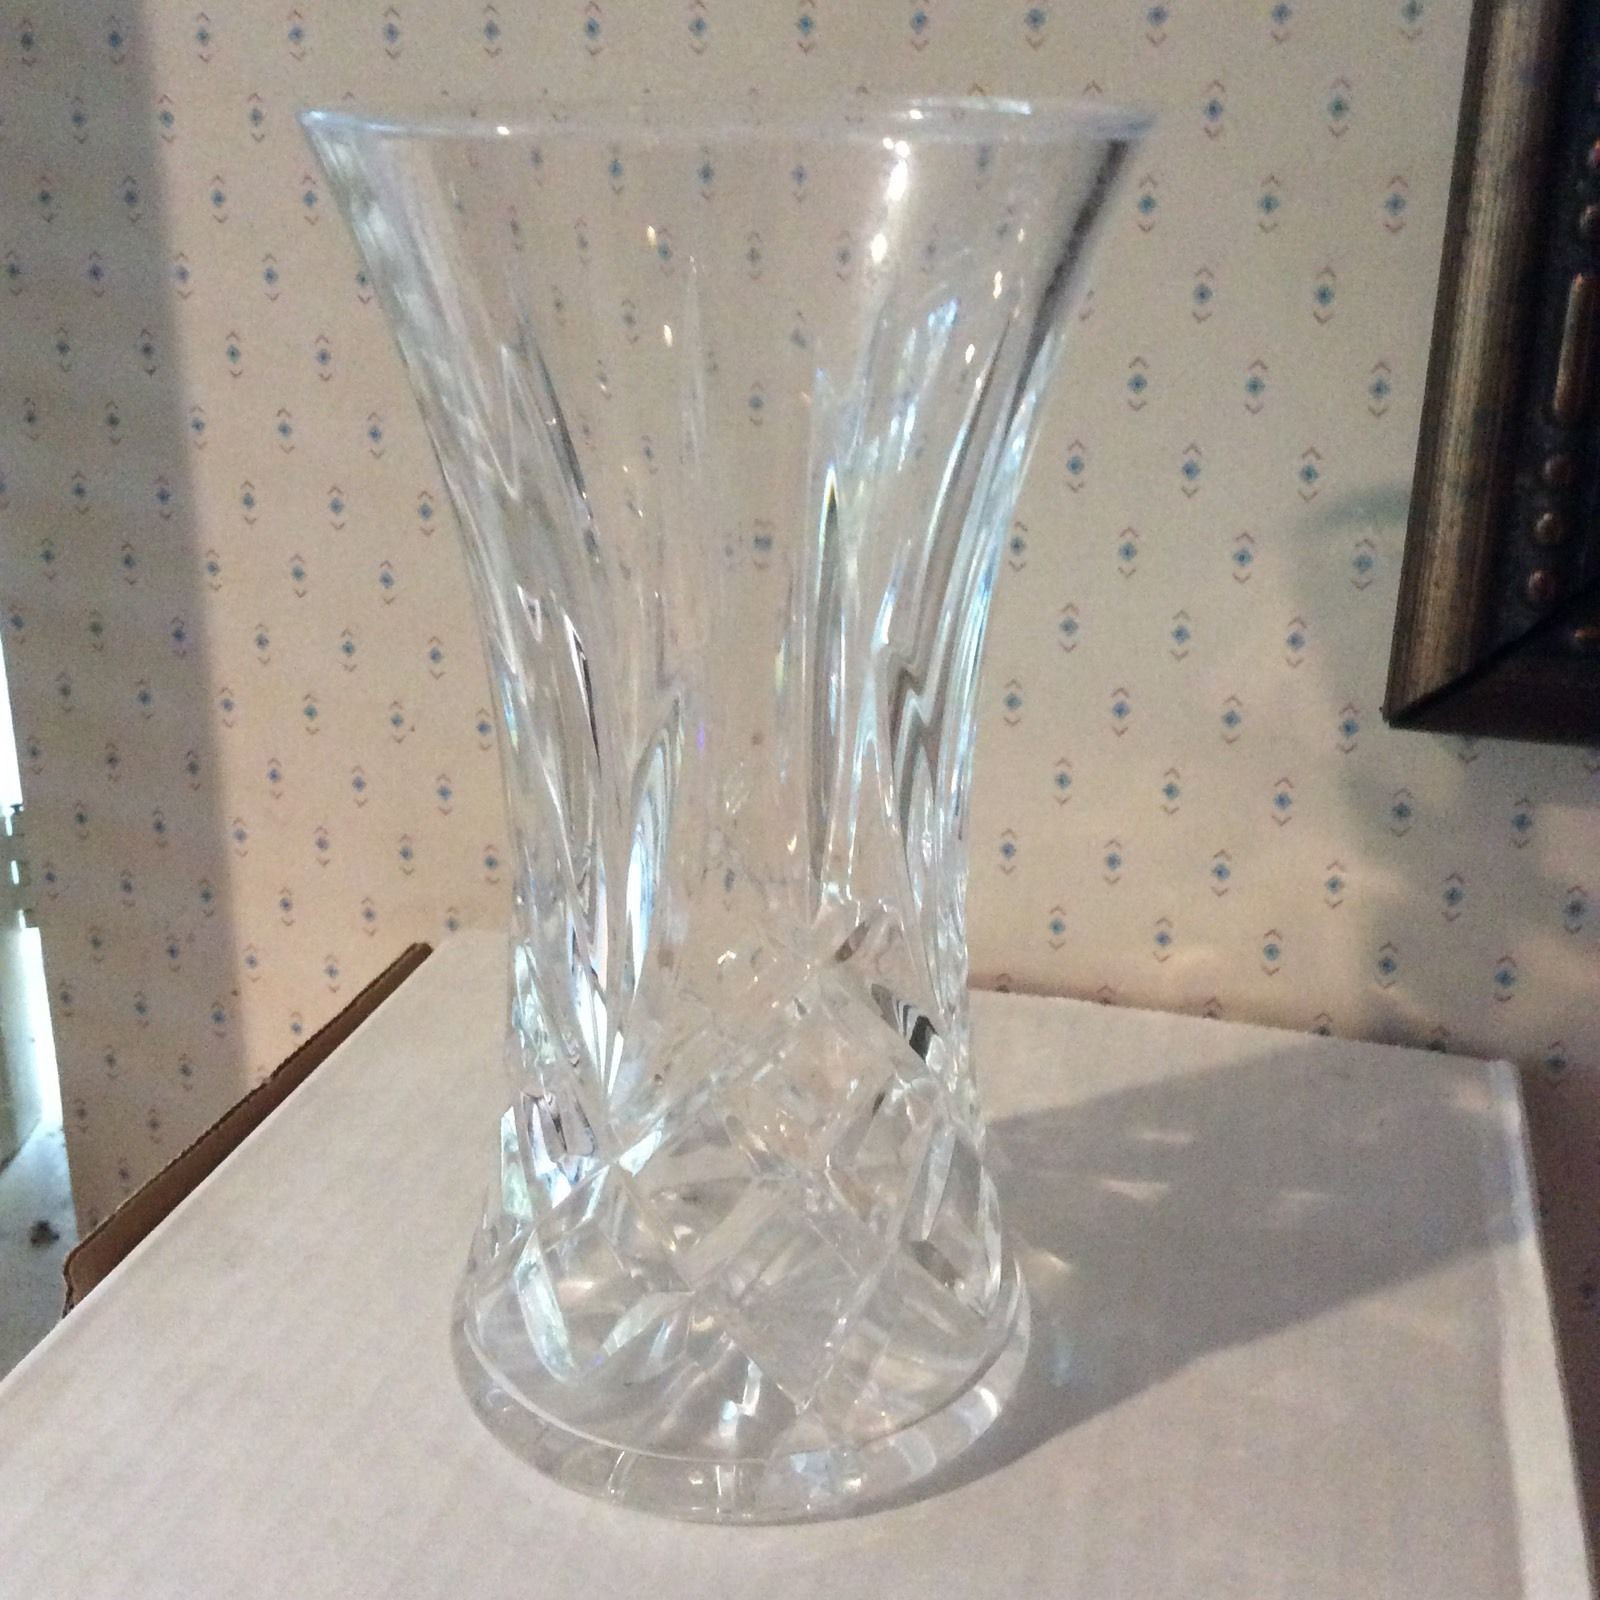 25 Fashionable Retired Waterford Crystal Vase Patterns 2022 free download retired waterford crystal vase patterns of vintage waterford crystal araglin vase 7 tall 49 99 picclick throughout vintage waterford crystal araglin vase 7 tall 1 of 7only 1 available